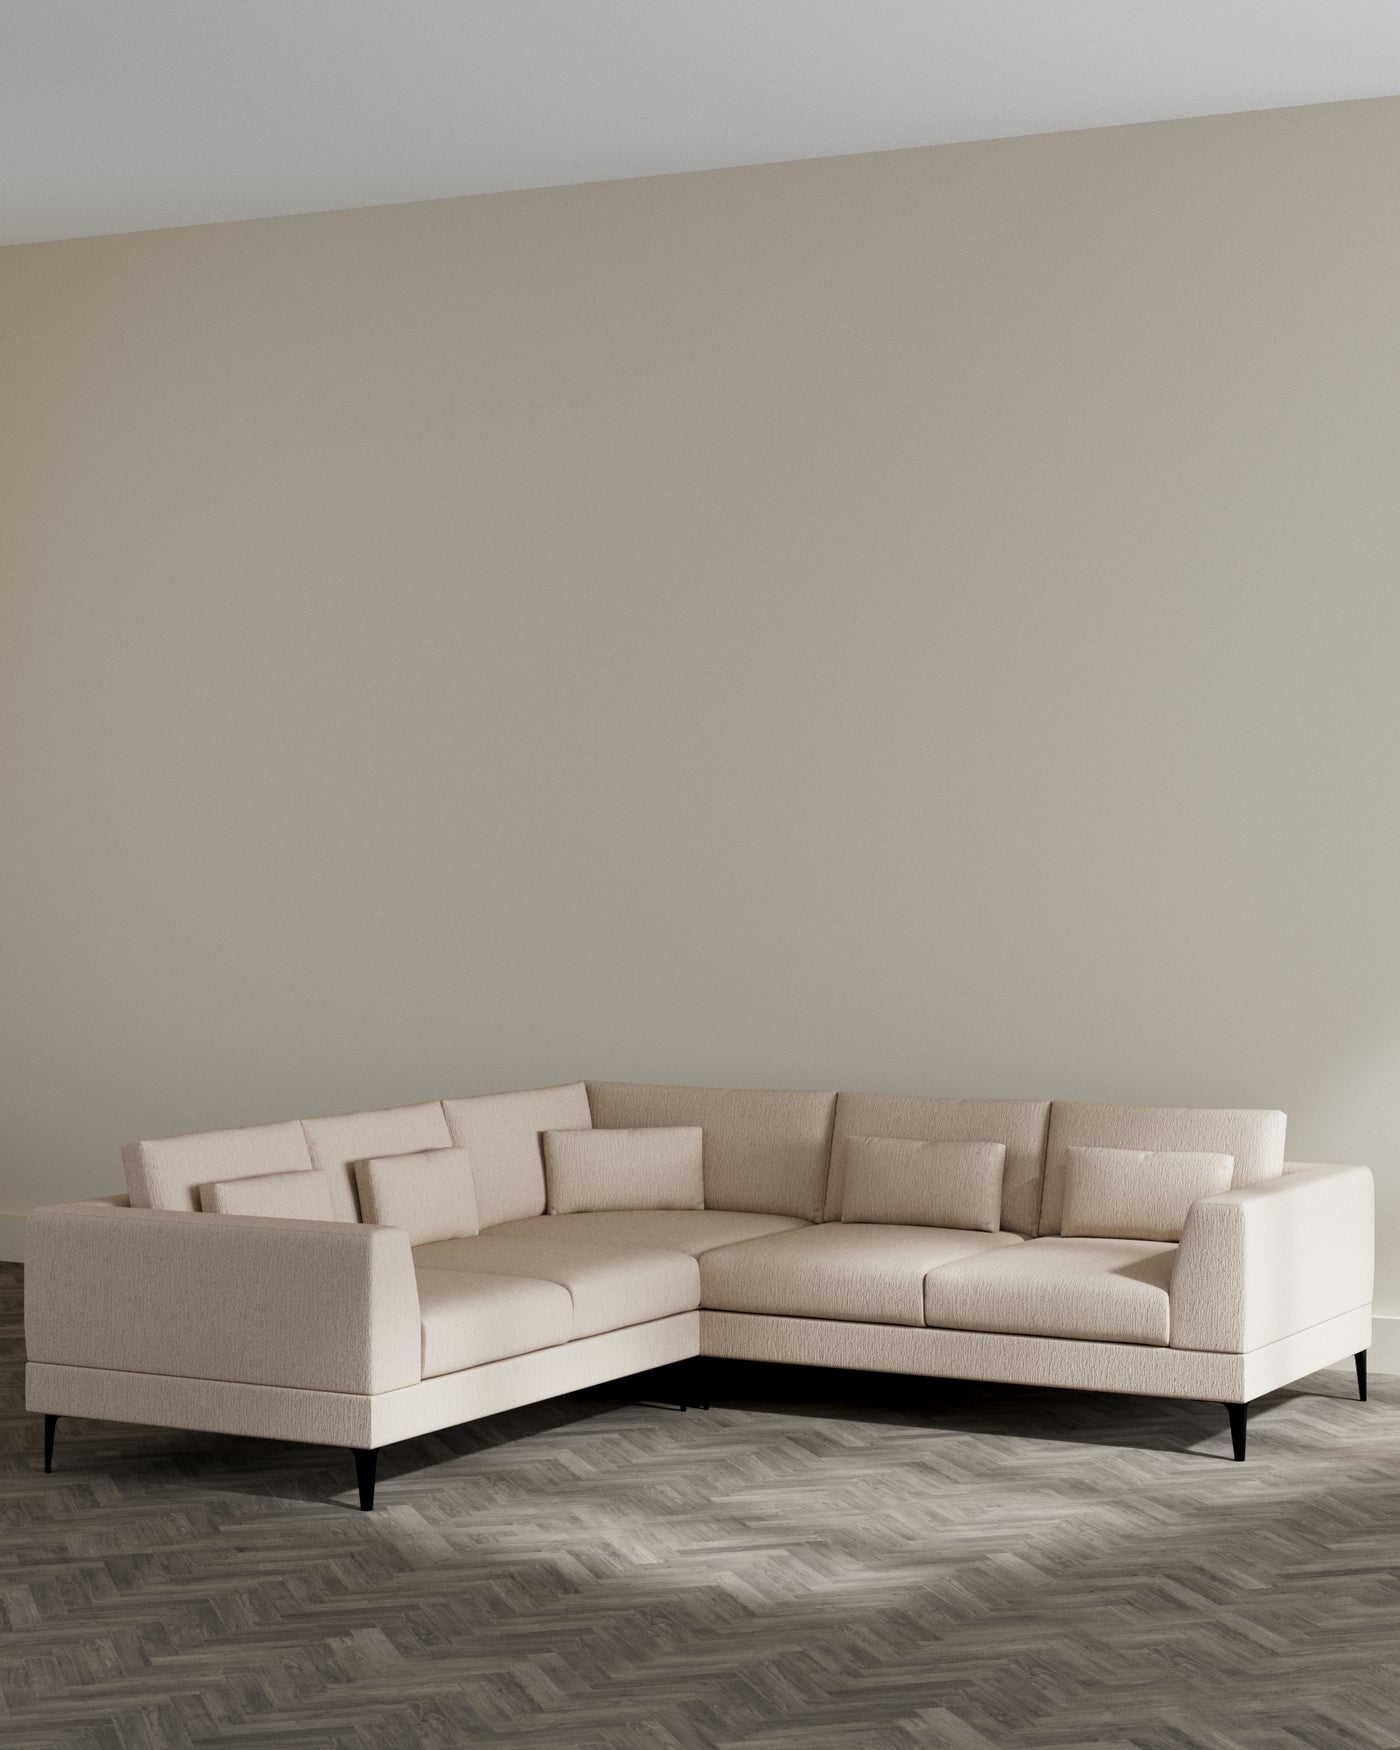 L-shaped sectional sofa with a minimalistic design, featuring a light beige upholstery and clean lines, supported by dark, tapered wood legs. The sofa includes multiple back cushions for added comfort, arranged in an open-concept space with herringbone wood flooring.